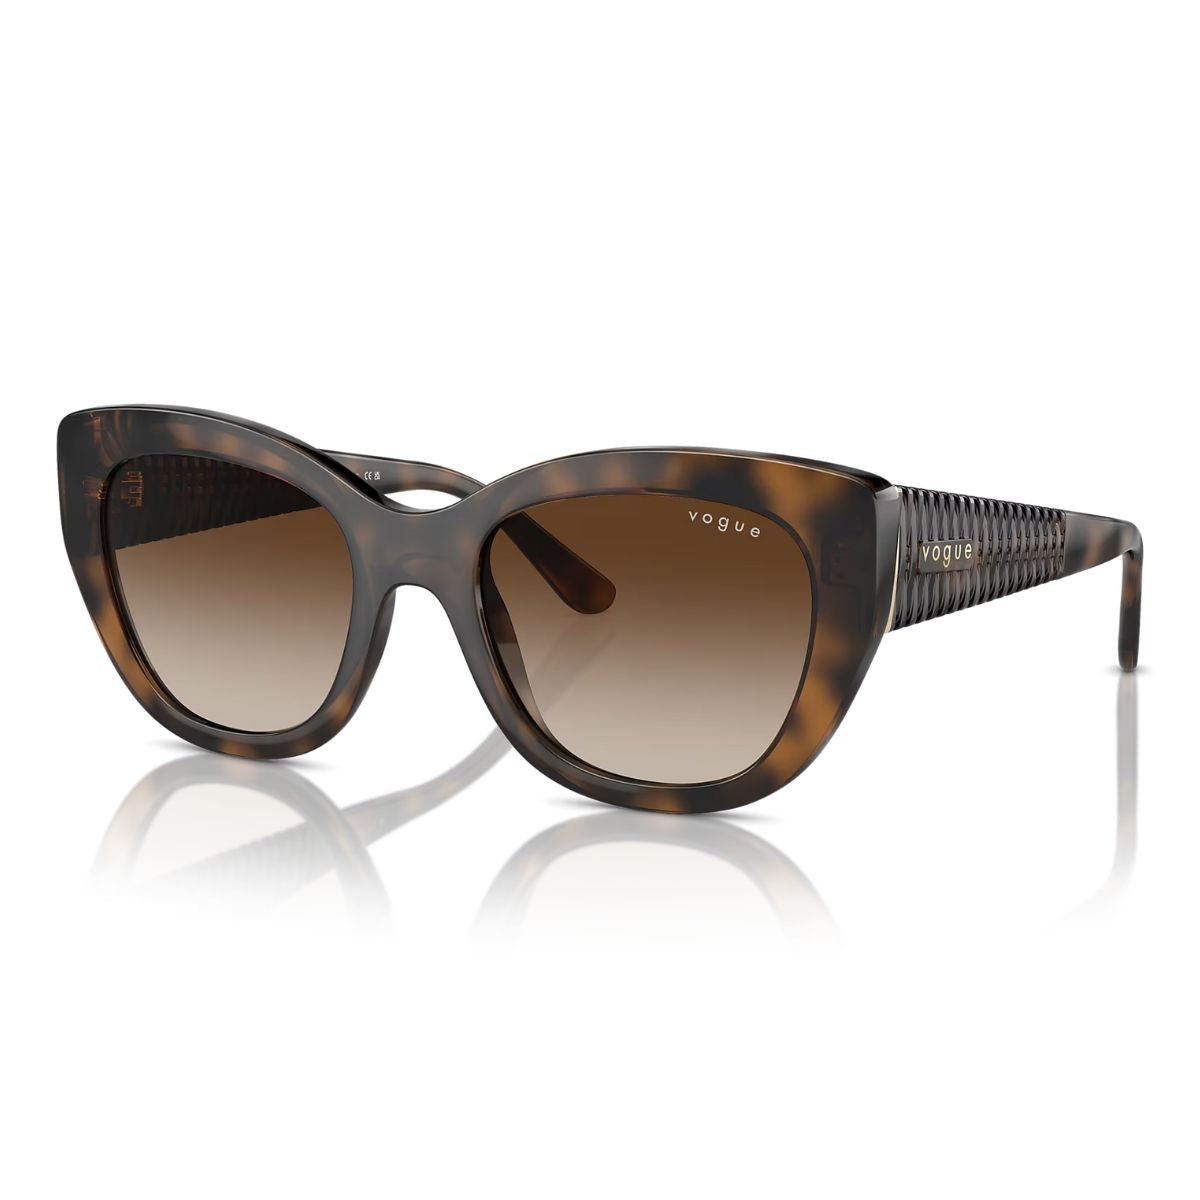 "Shop Vogue Eyewear 5567 Havana Cat Eye Sunglasses for Women at Optorium with UV protection, and free shipping."